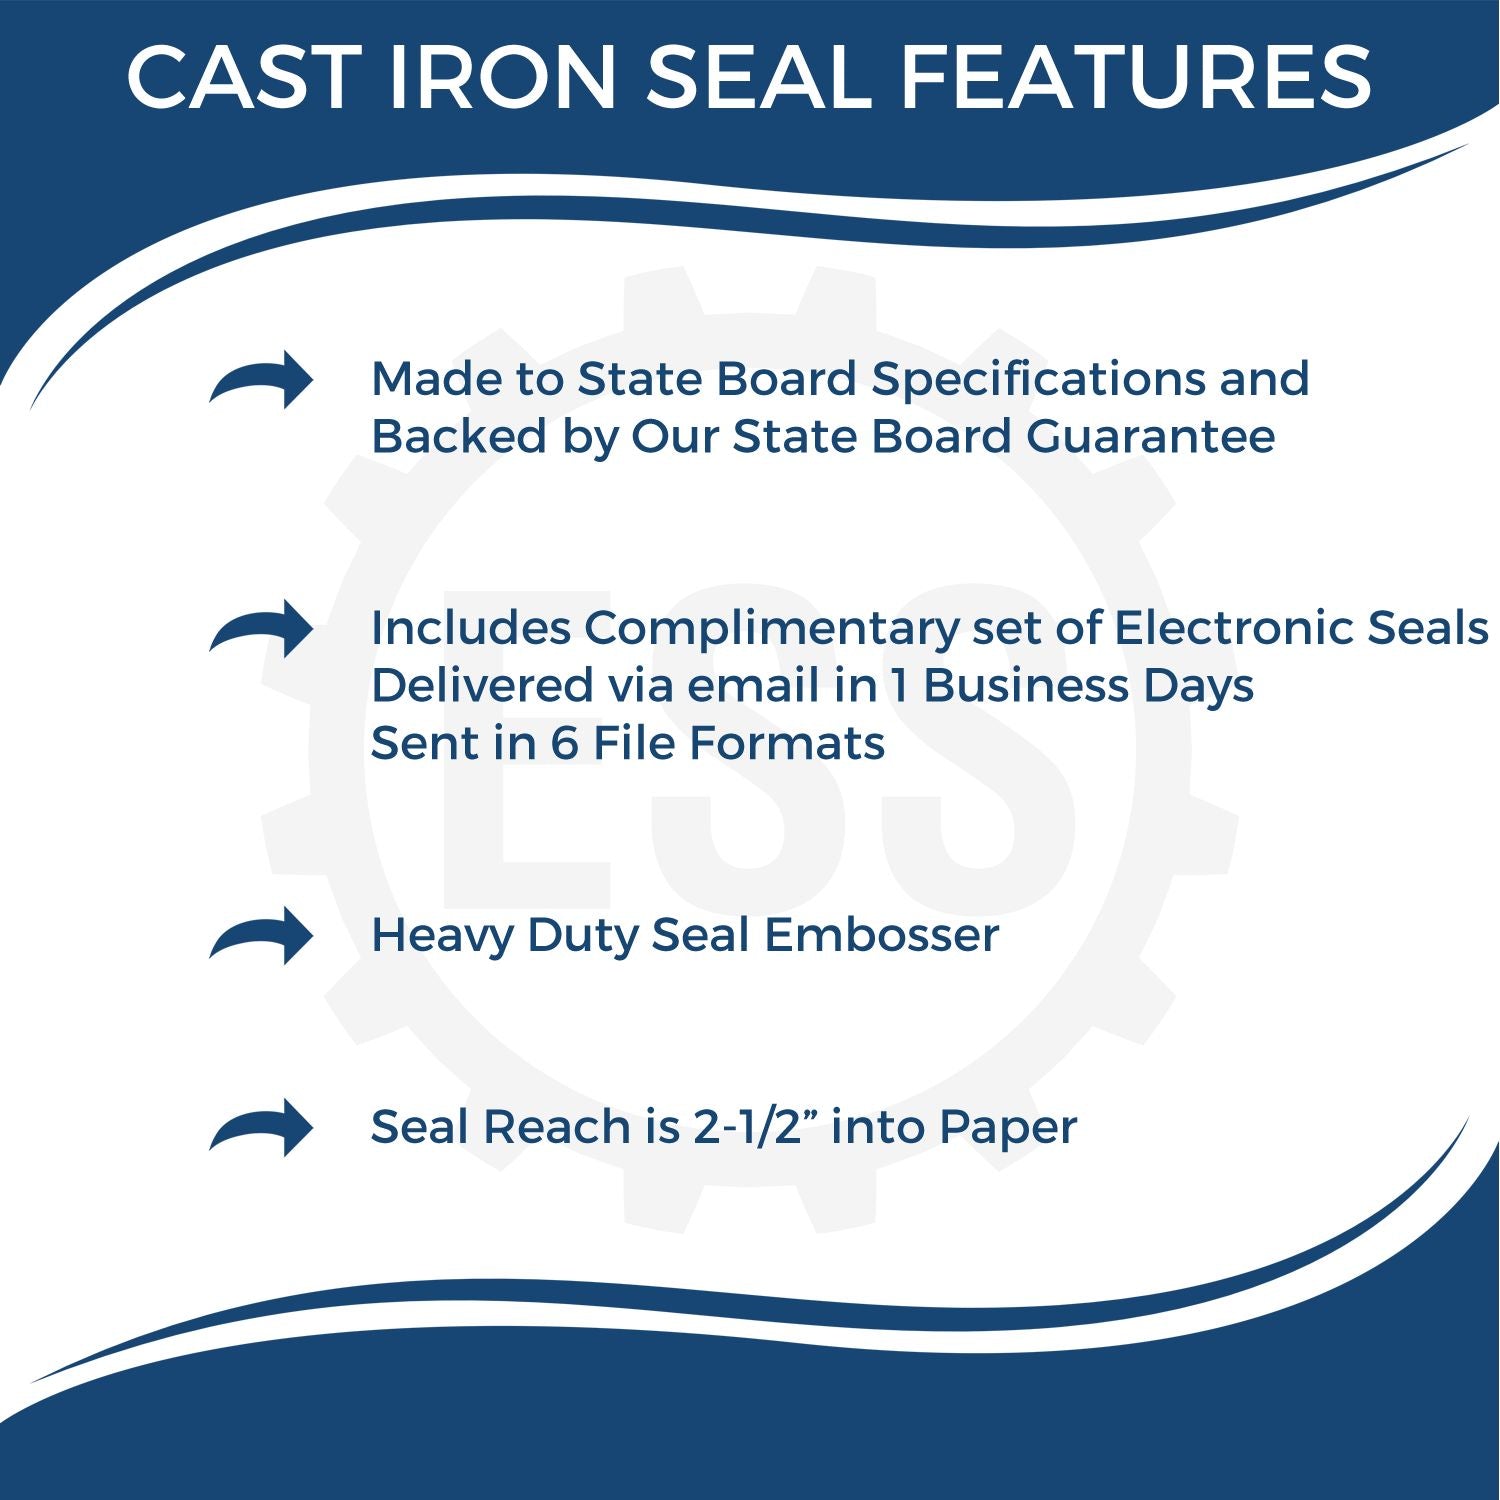 The main image for the Heavy Duty Cast Iron Utah Engineer Seal Embosser depicting a sample of the imprint and electronic files